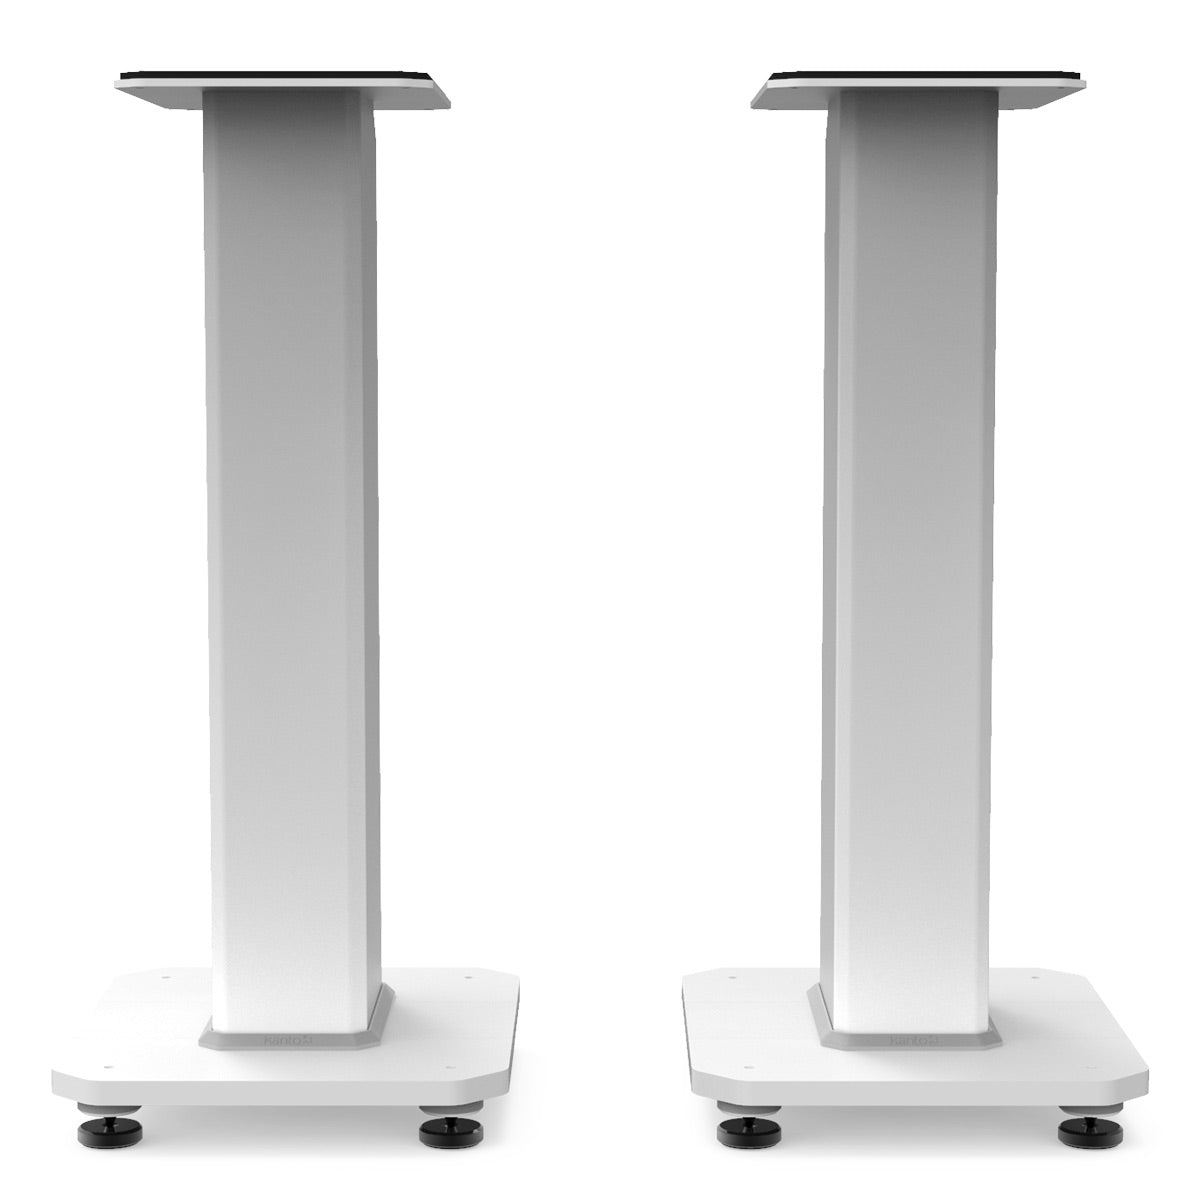 Kanto SX22 22" Tall Fillable Speaker Stands with Isolation Feet - Pair (White)